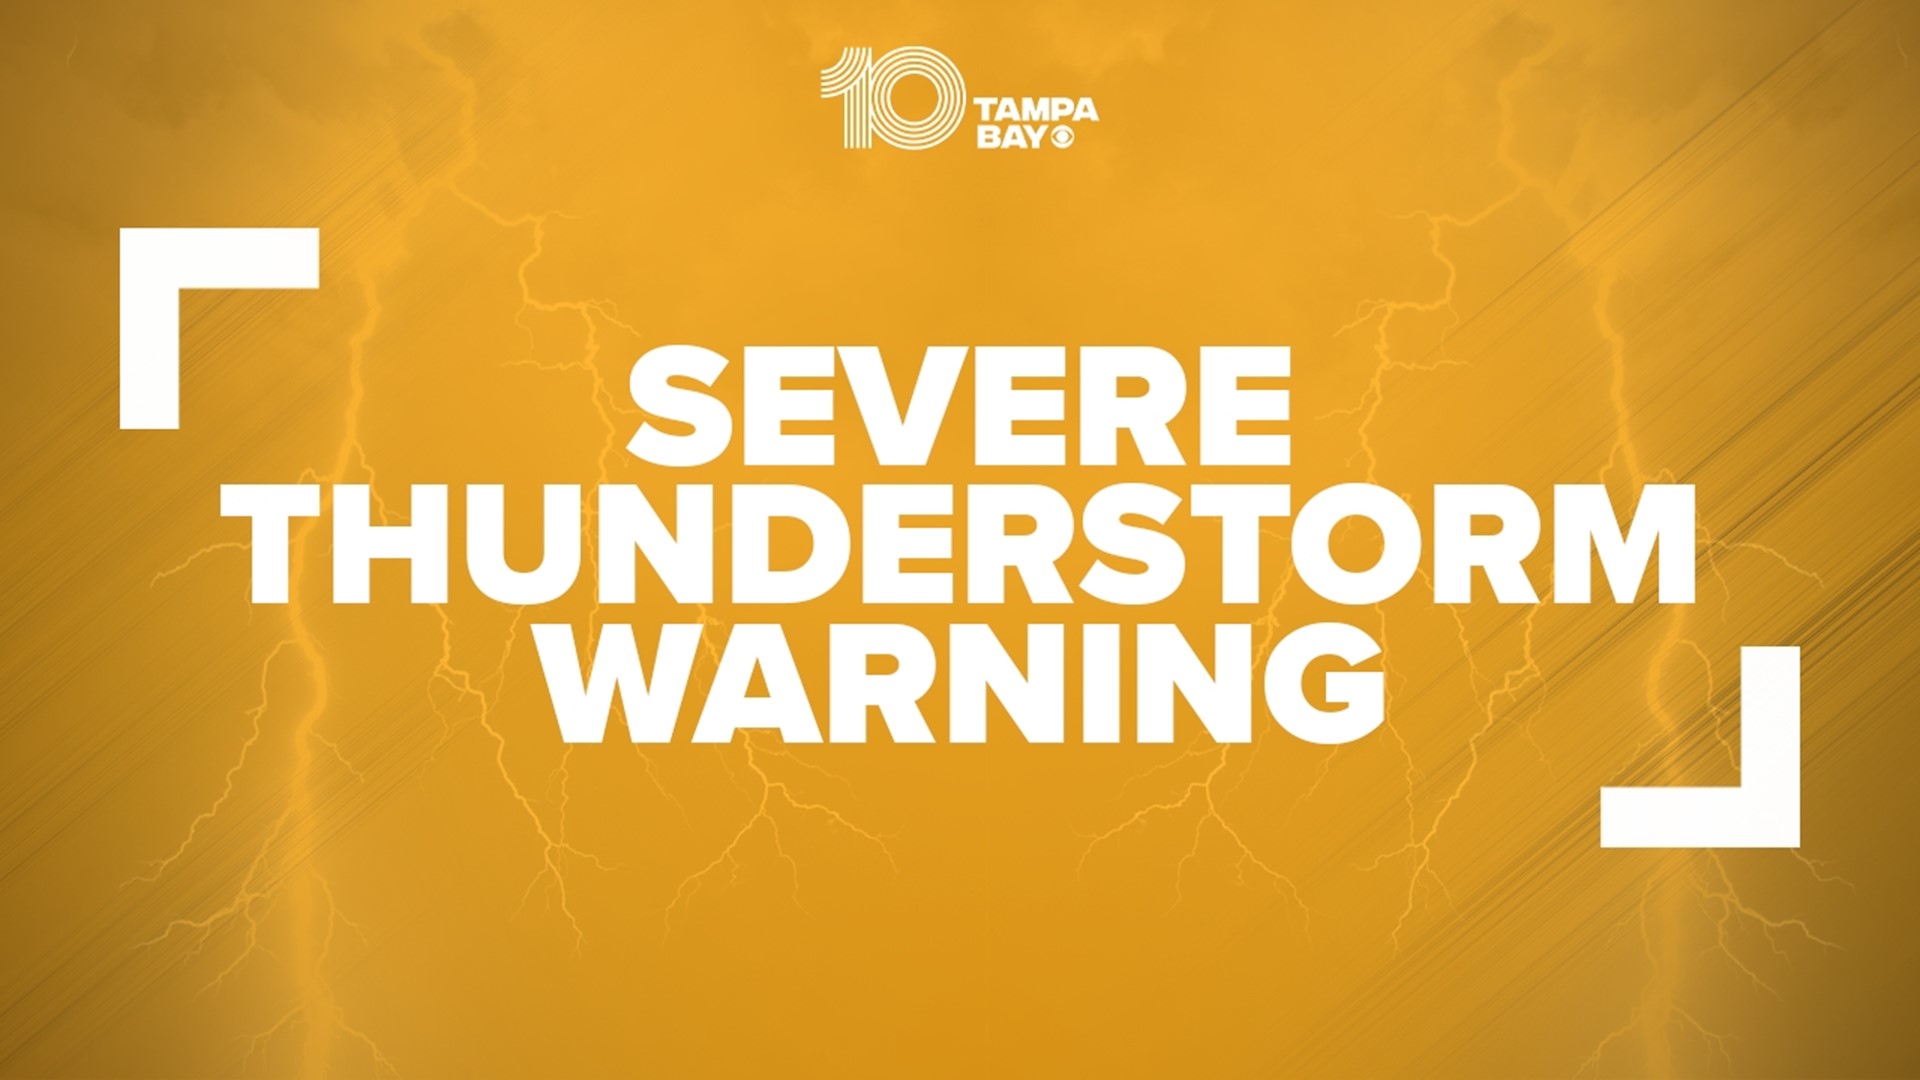 A severe thunderstorm warning was issued for Hernando, Pasco and Citrus counties. It has been allowed to expire.